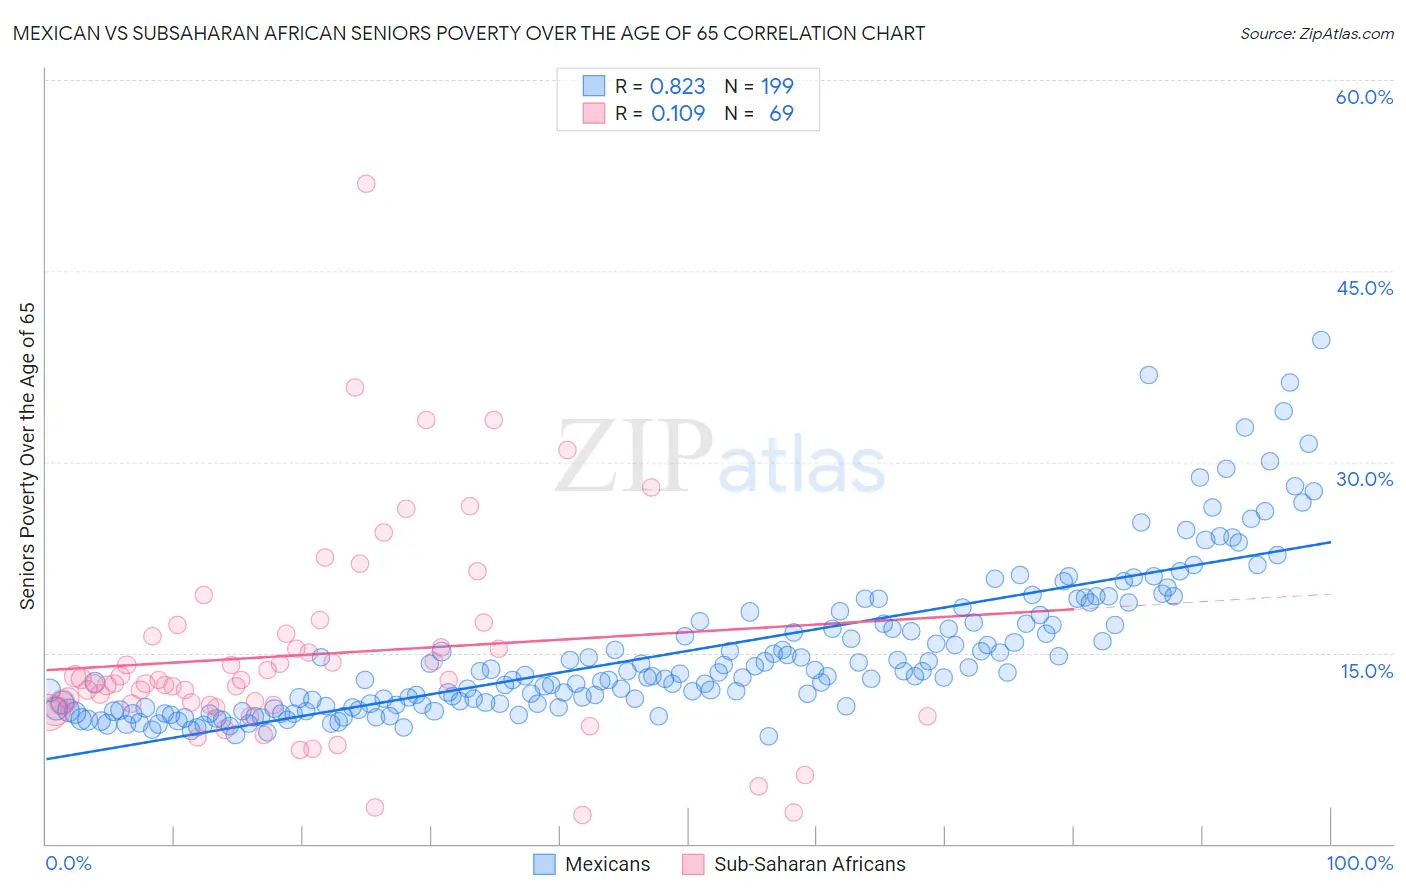 Mexican vs Subsaharan African Seniors Poverty Over the Age of 65